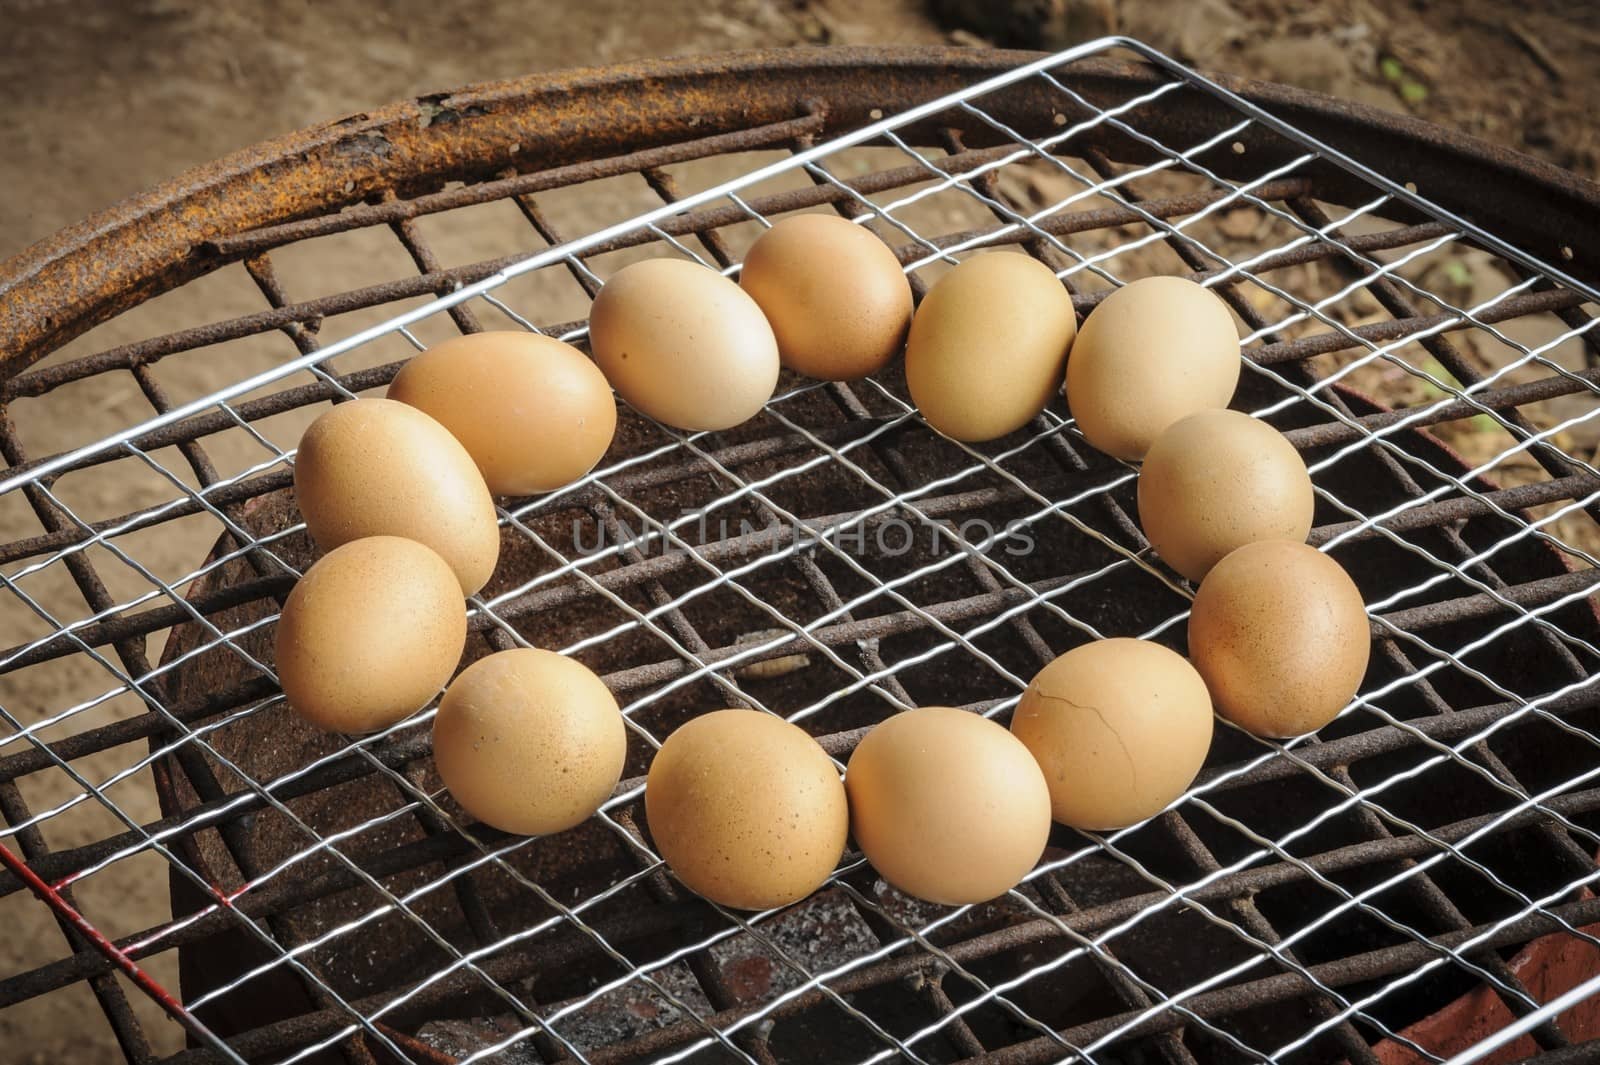 Chicken eggs Grilled over stove gridiron. by ngungfoto